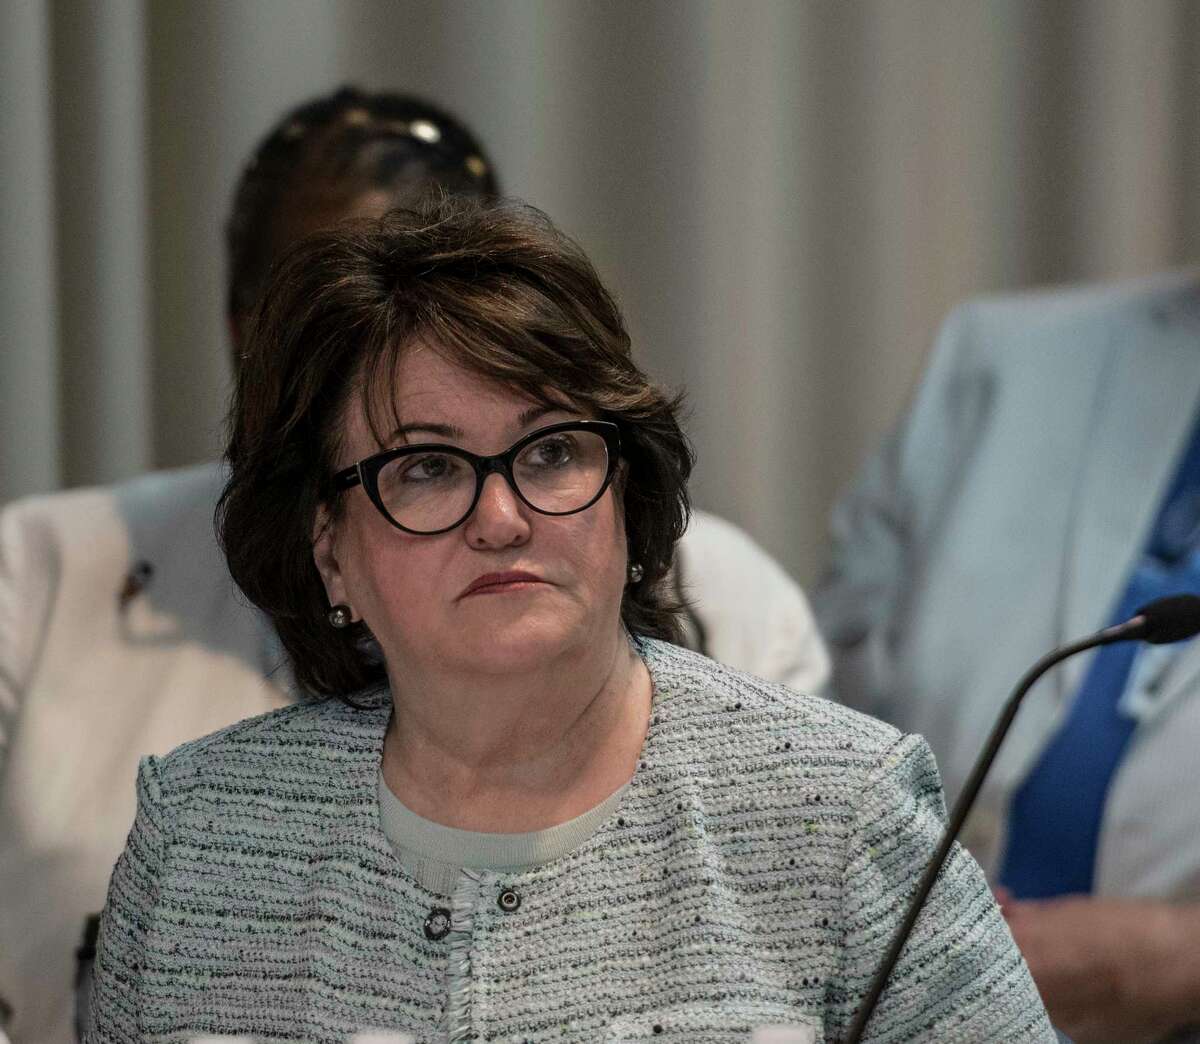 New York State Department of Education MaryEllen Elia in attendance at the Board of Regents meeting at the Education Building Monday, July 16, 2018 in Albany, N.Y. (Skip Dickstein/Times Union)